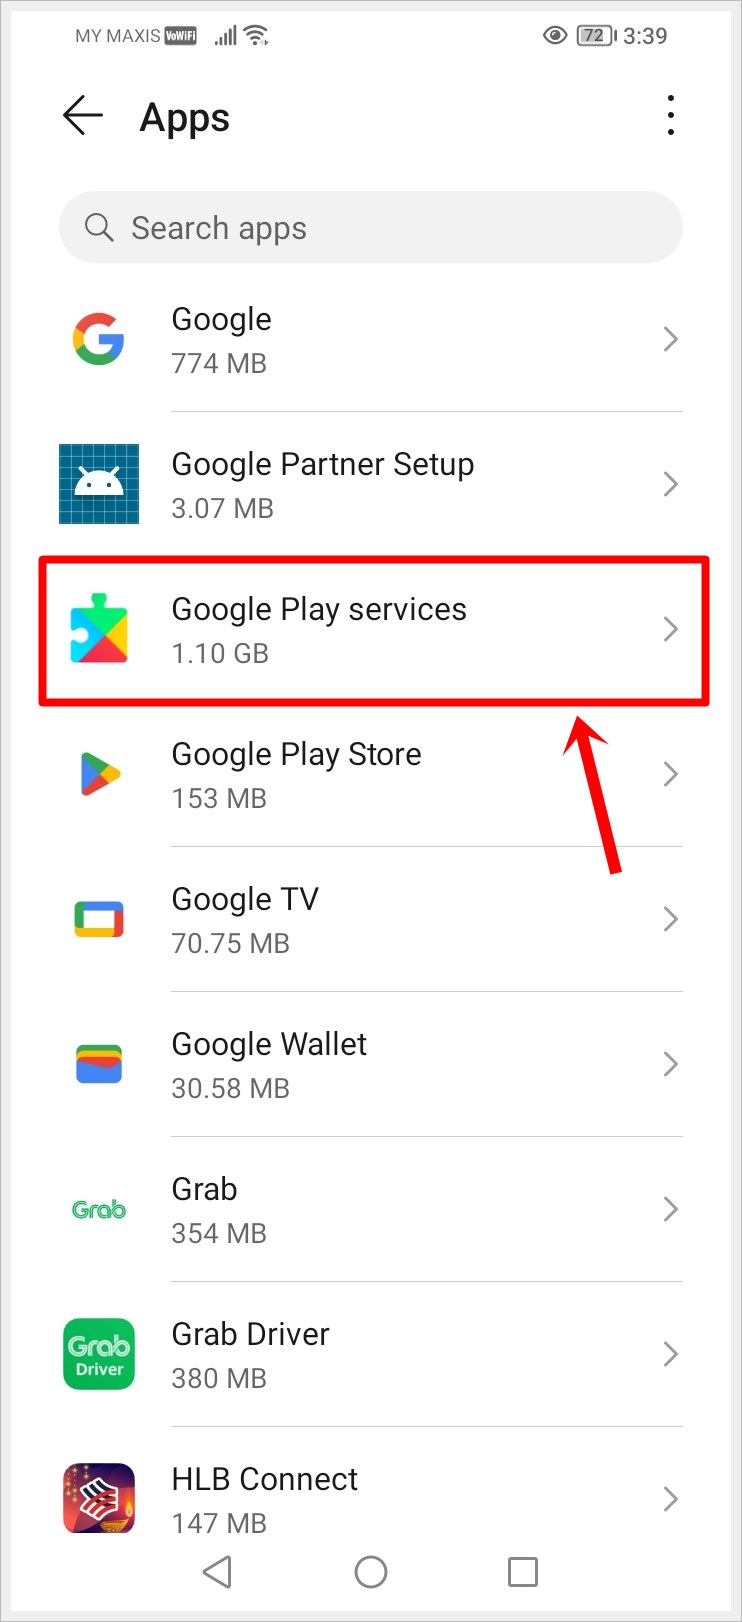 This image shows the Apps screen of an Android phone, with the 'Google Play services' option highlighted.